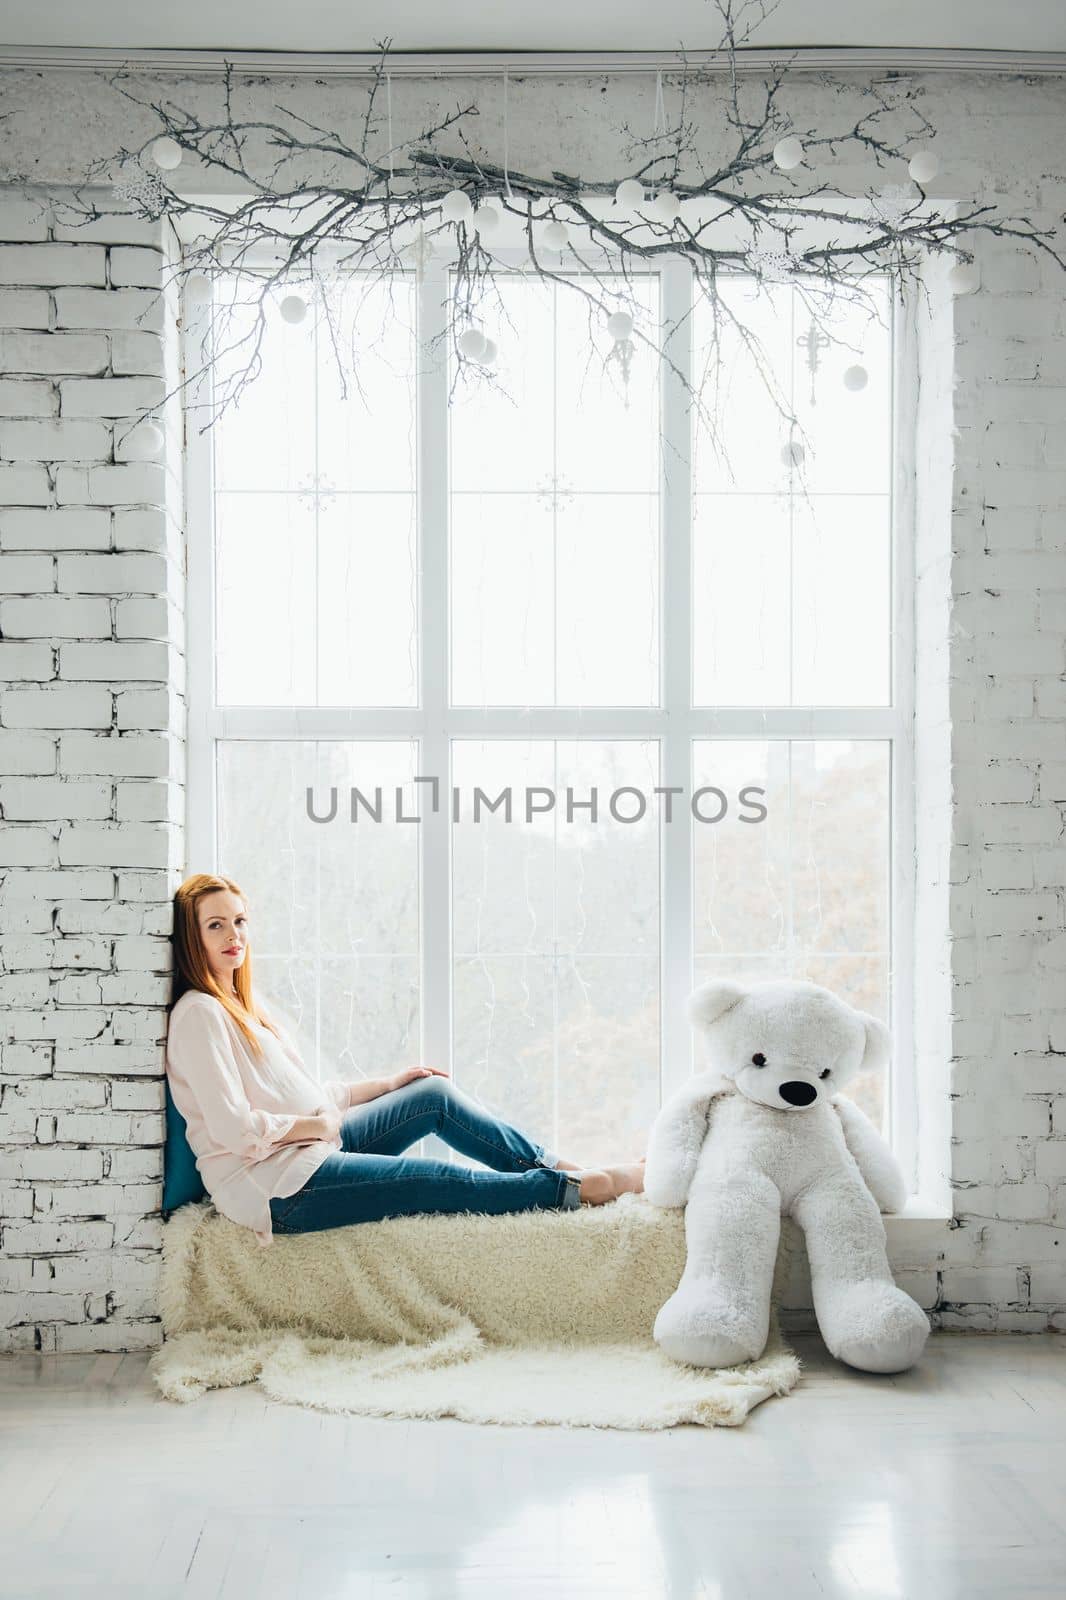 red-haired pregnant girl in a light blouse and blue jeans by Andreua